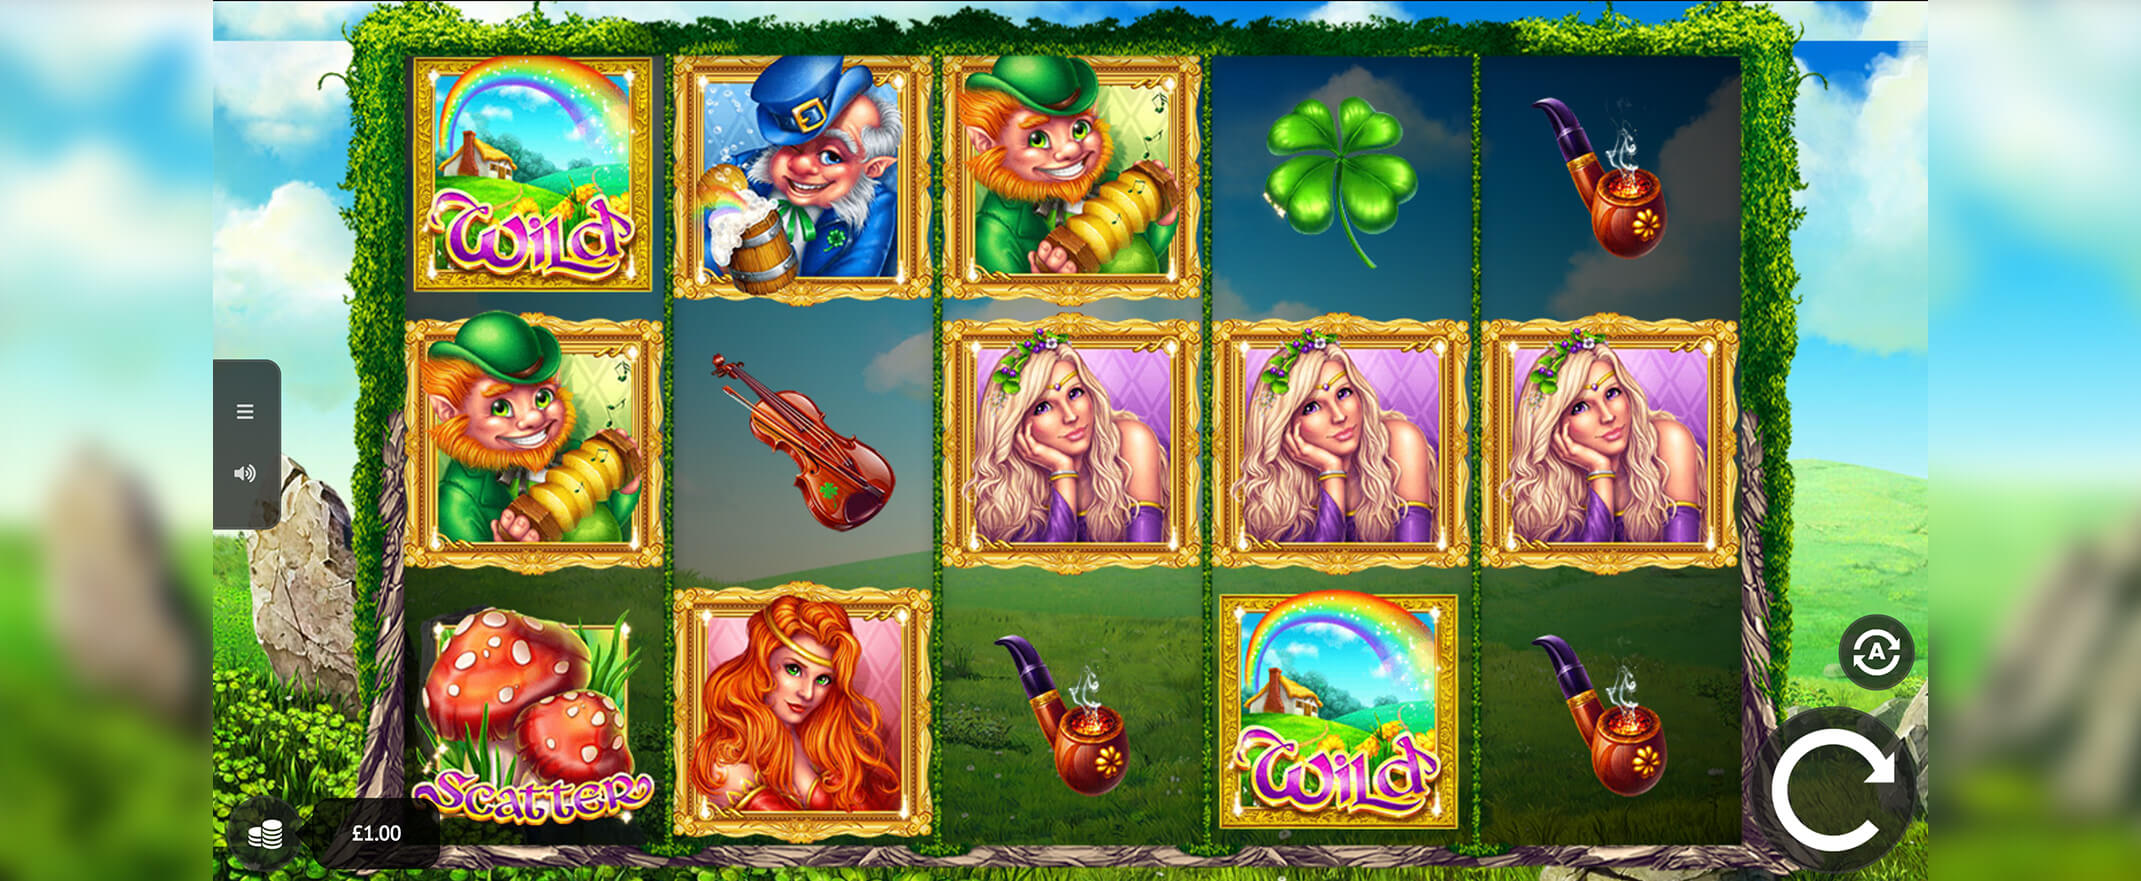 Irish Love Slot Review, image of the reels and symbols